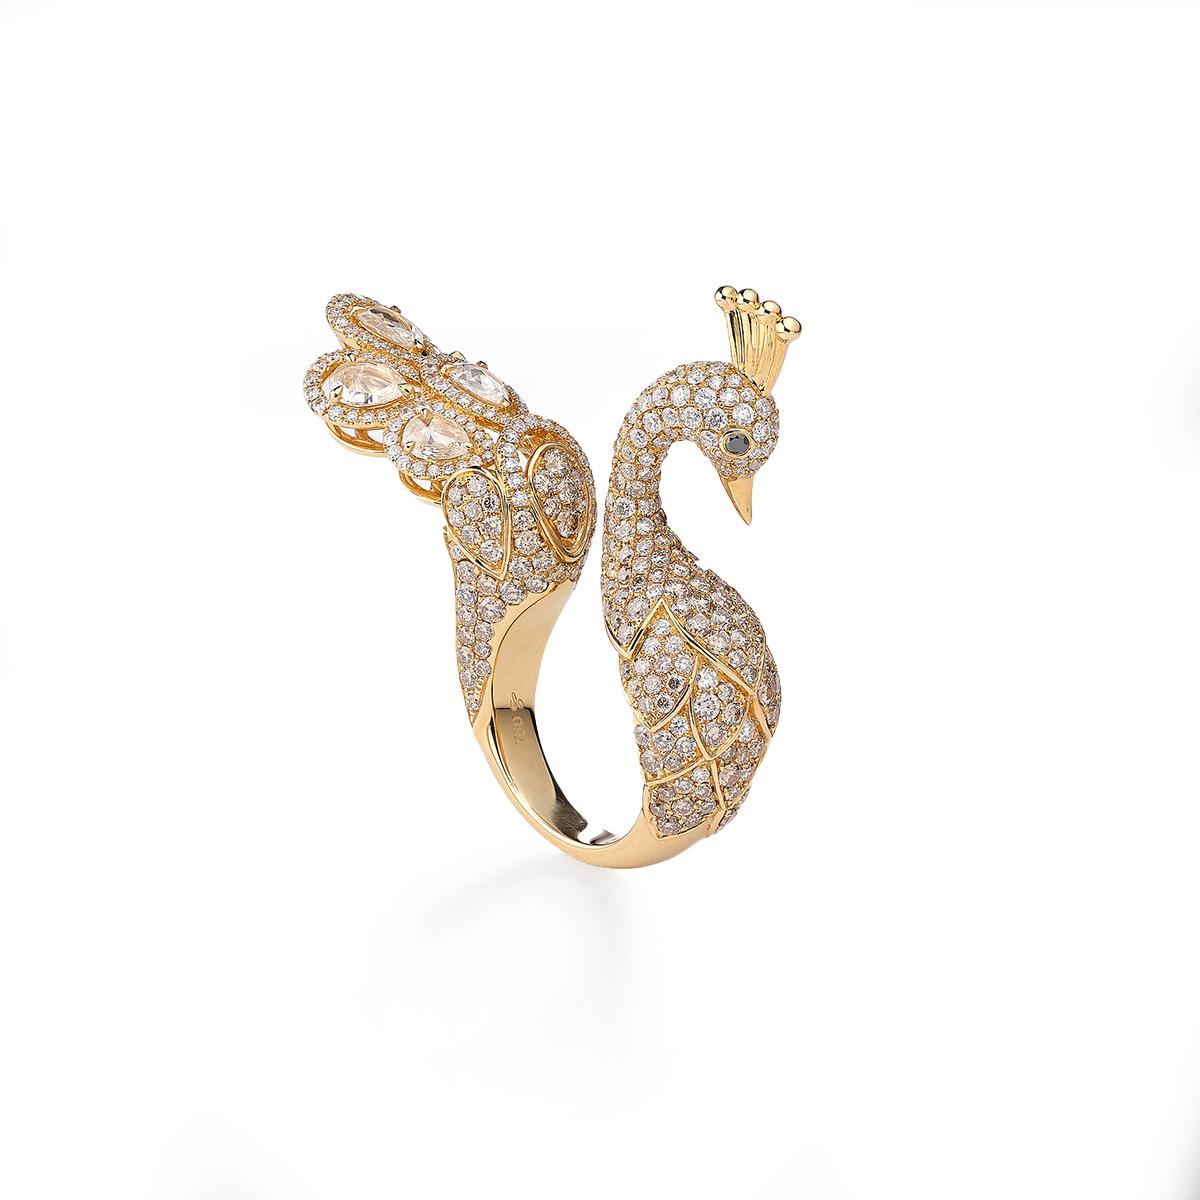 Peacok ring in 18kt yellow gold set with 236 diamonds 1.72 cts, 6 rose cut  pear-shaped diamonds 1.07 cts, 201 brown diamonds 3.05 cts, and 2 black diamonds 0.03 cts Size 54               